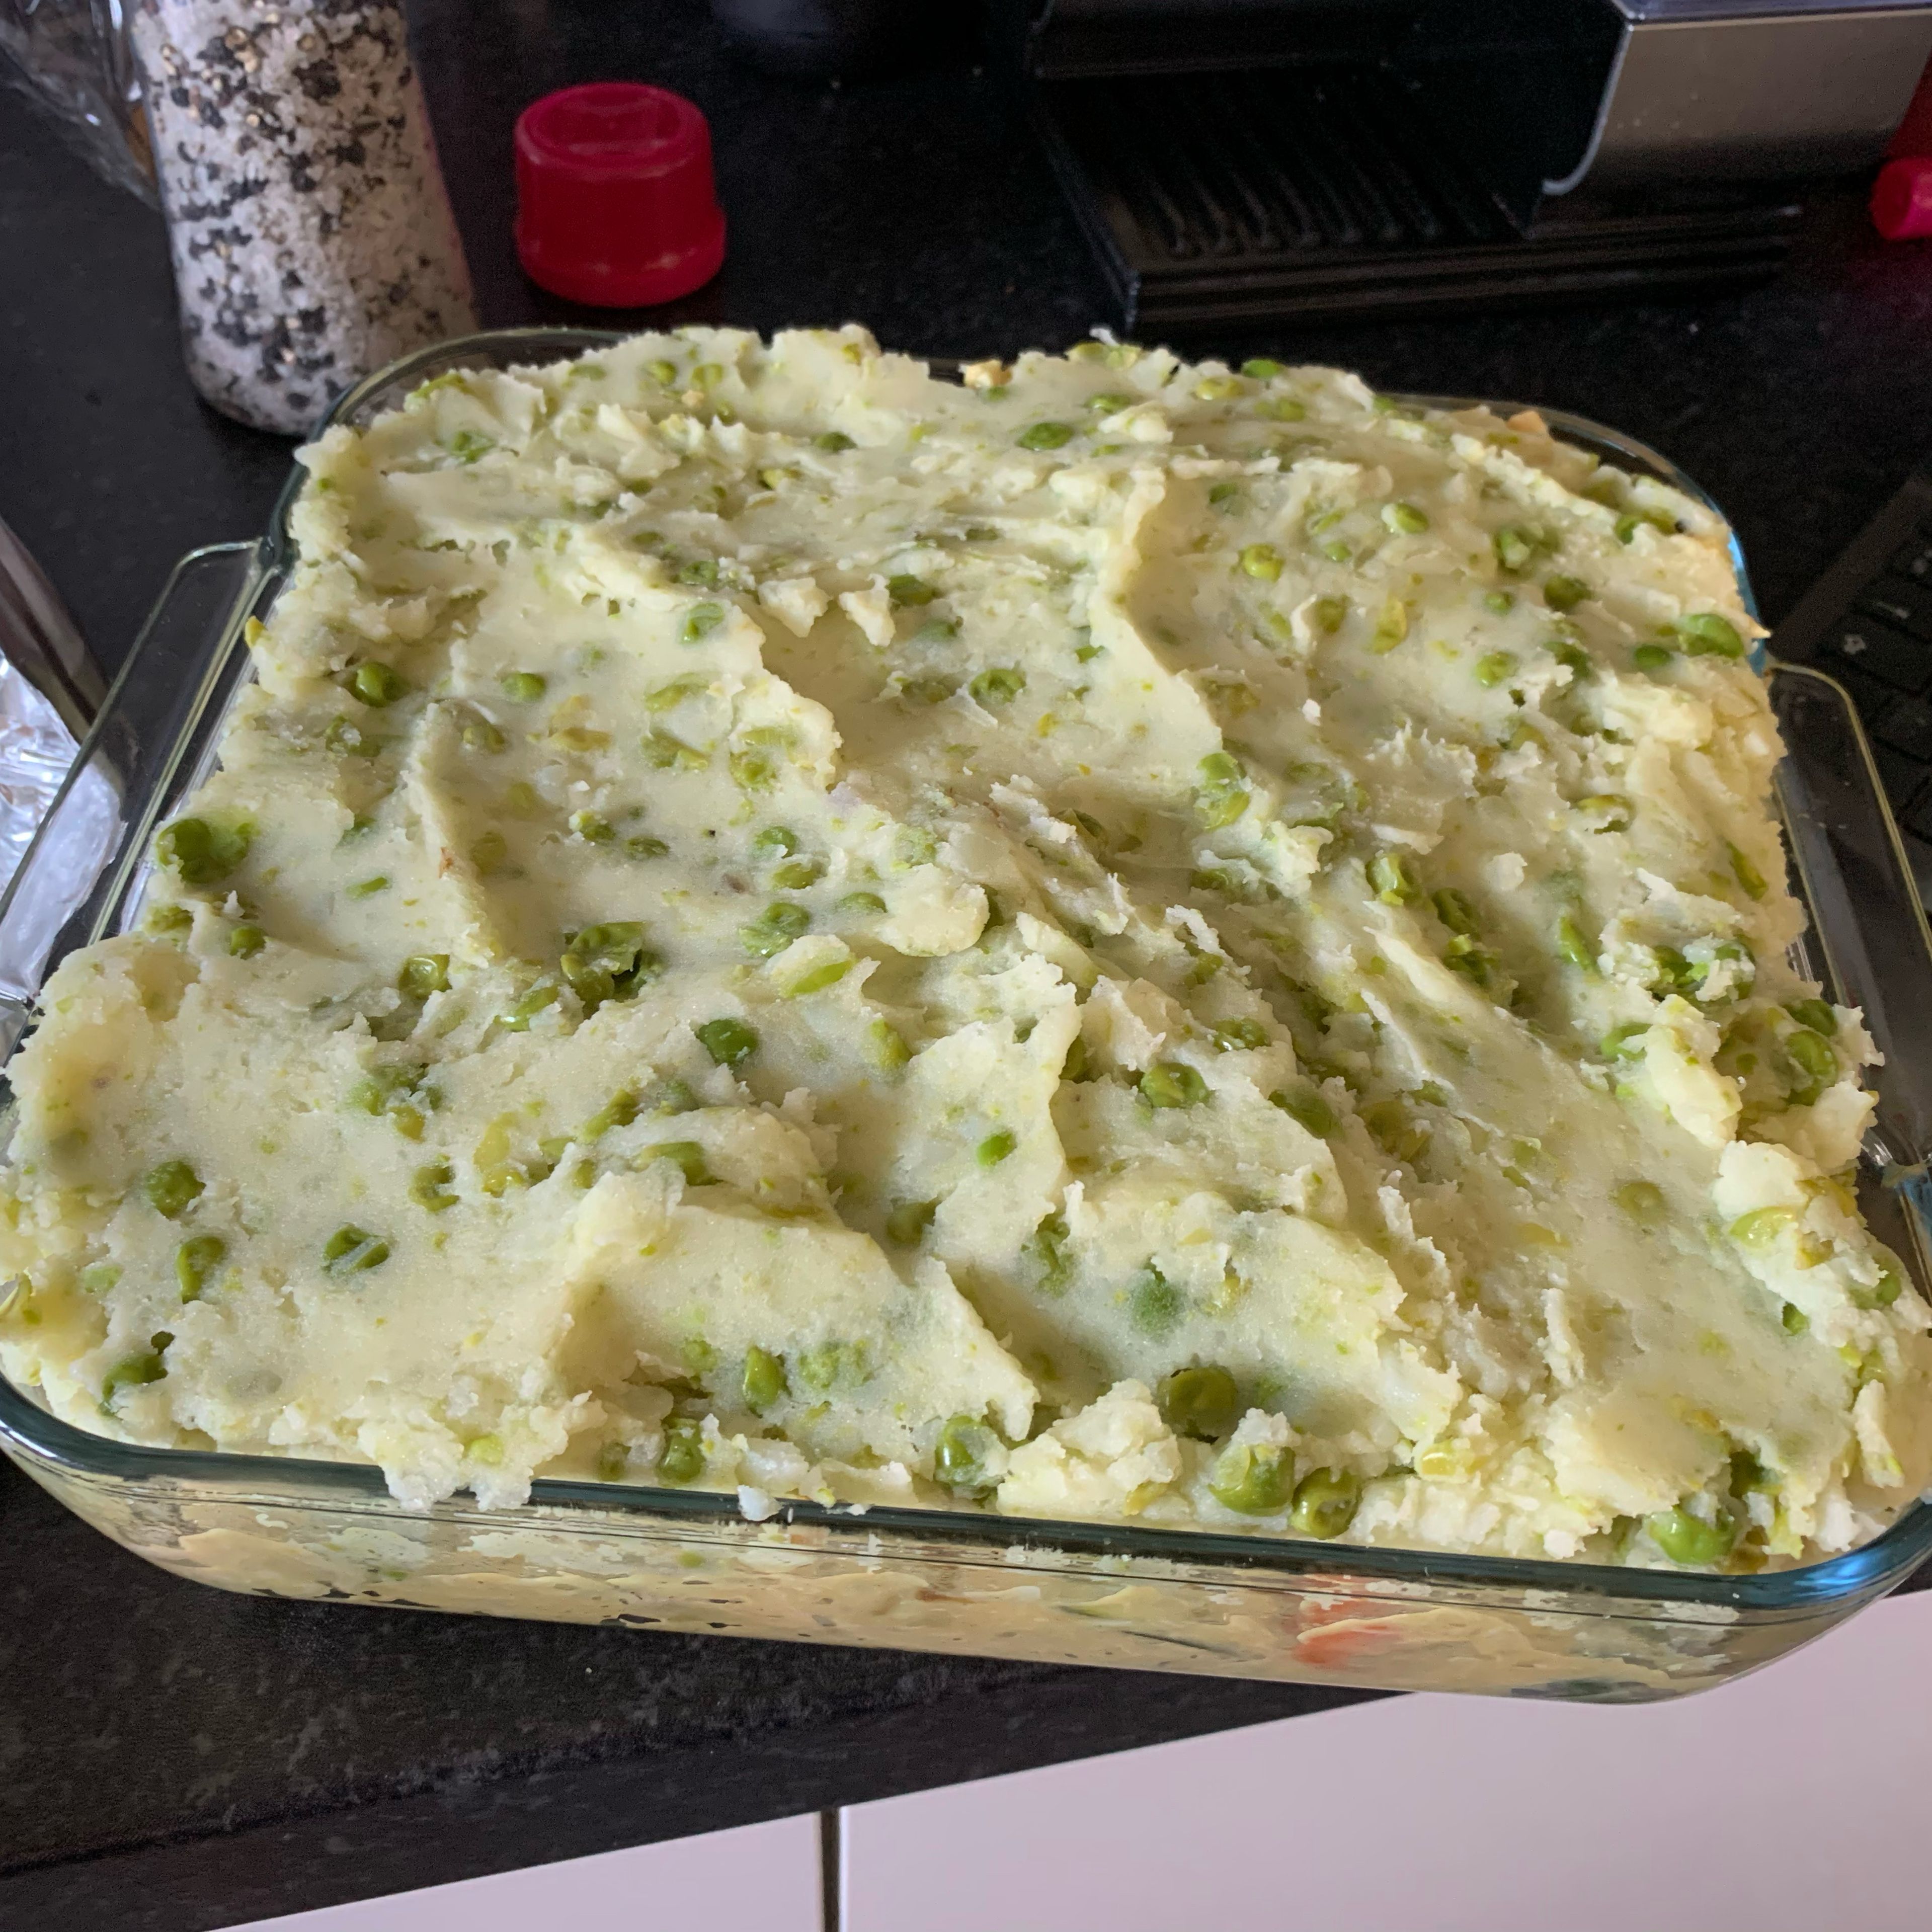 Top with the pea-spiked mash and smooth out, scuffing it up slightly with a fork to give it texture that will crisp up. Bake for 30-40 minutes, or until beautifully golden. Serve with a good old helping of baked beans (if you like). Delicious!